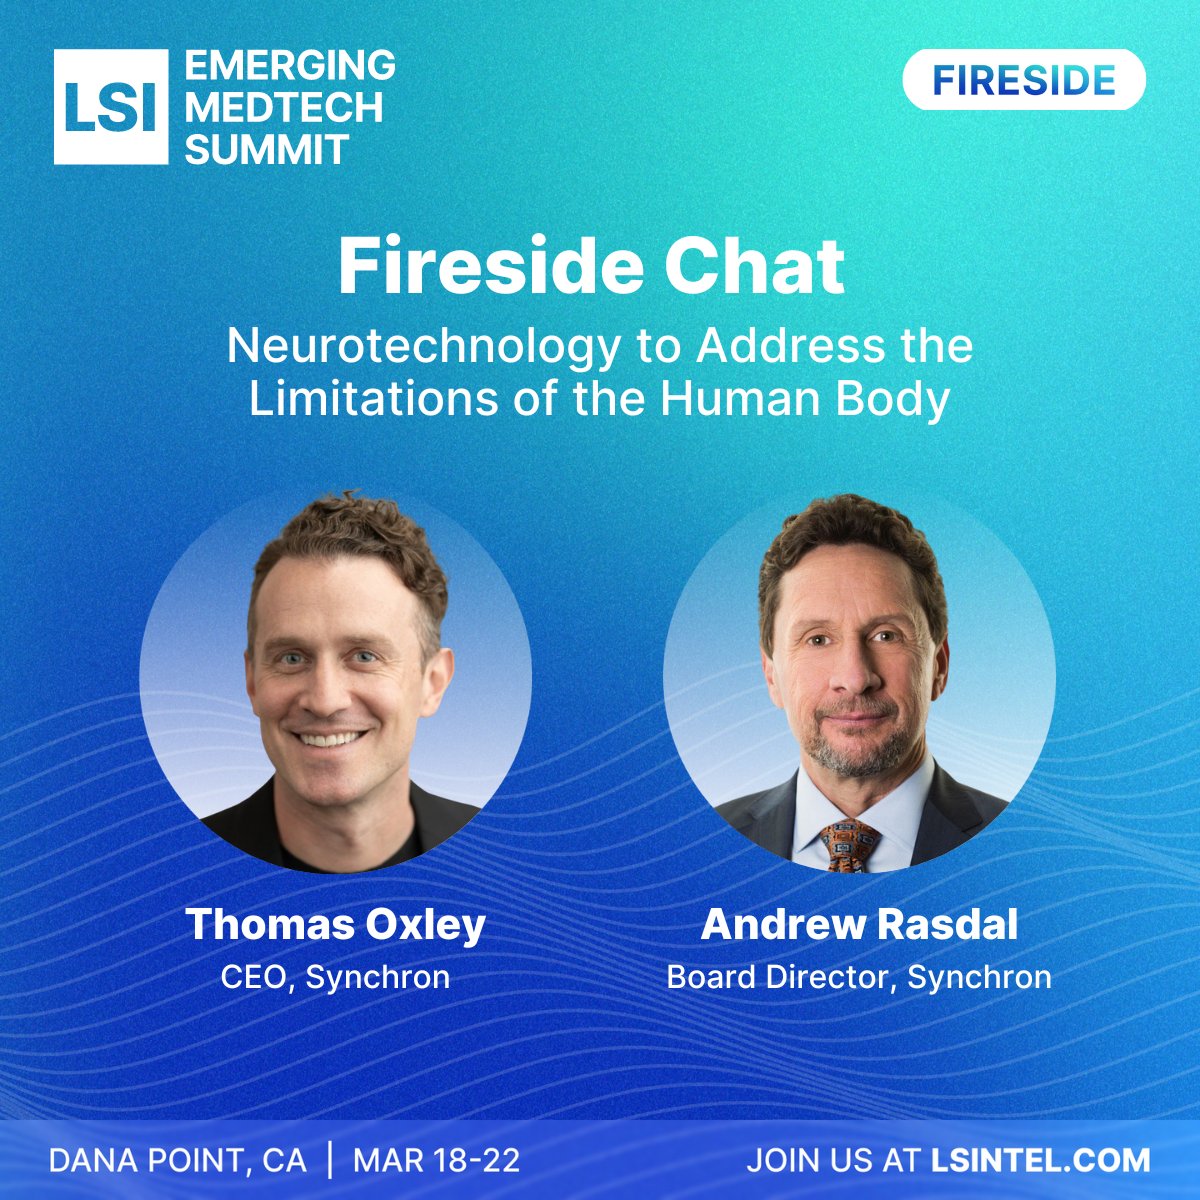 Step into the future of neurotechnology at #LSIUSA24. Our latest Fireside Chat, “Neurotechnology to Address the Limitations of the Human Body”, features Thomas Oxley, CEO of Synchron, and Andrew Rasdal, Former Dexcom CEO and Board Director at Synchron.